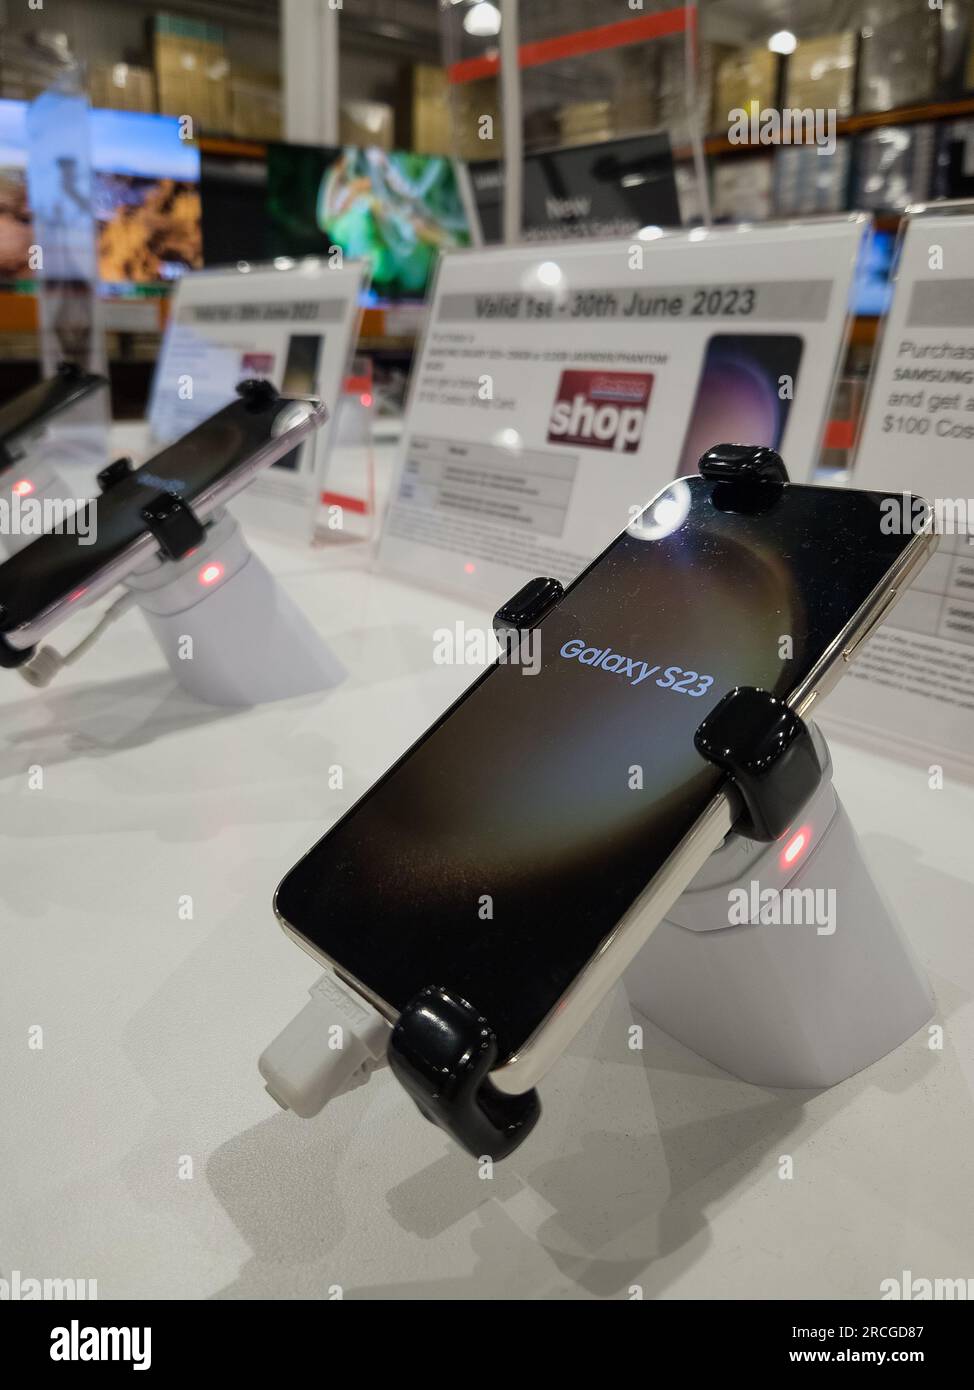 Auckland, New Zealand - June 30, 2023: Samsung Galaxy S23 Android smartphone on display for sale at Costco. Stock Photo